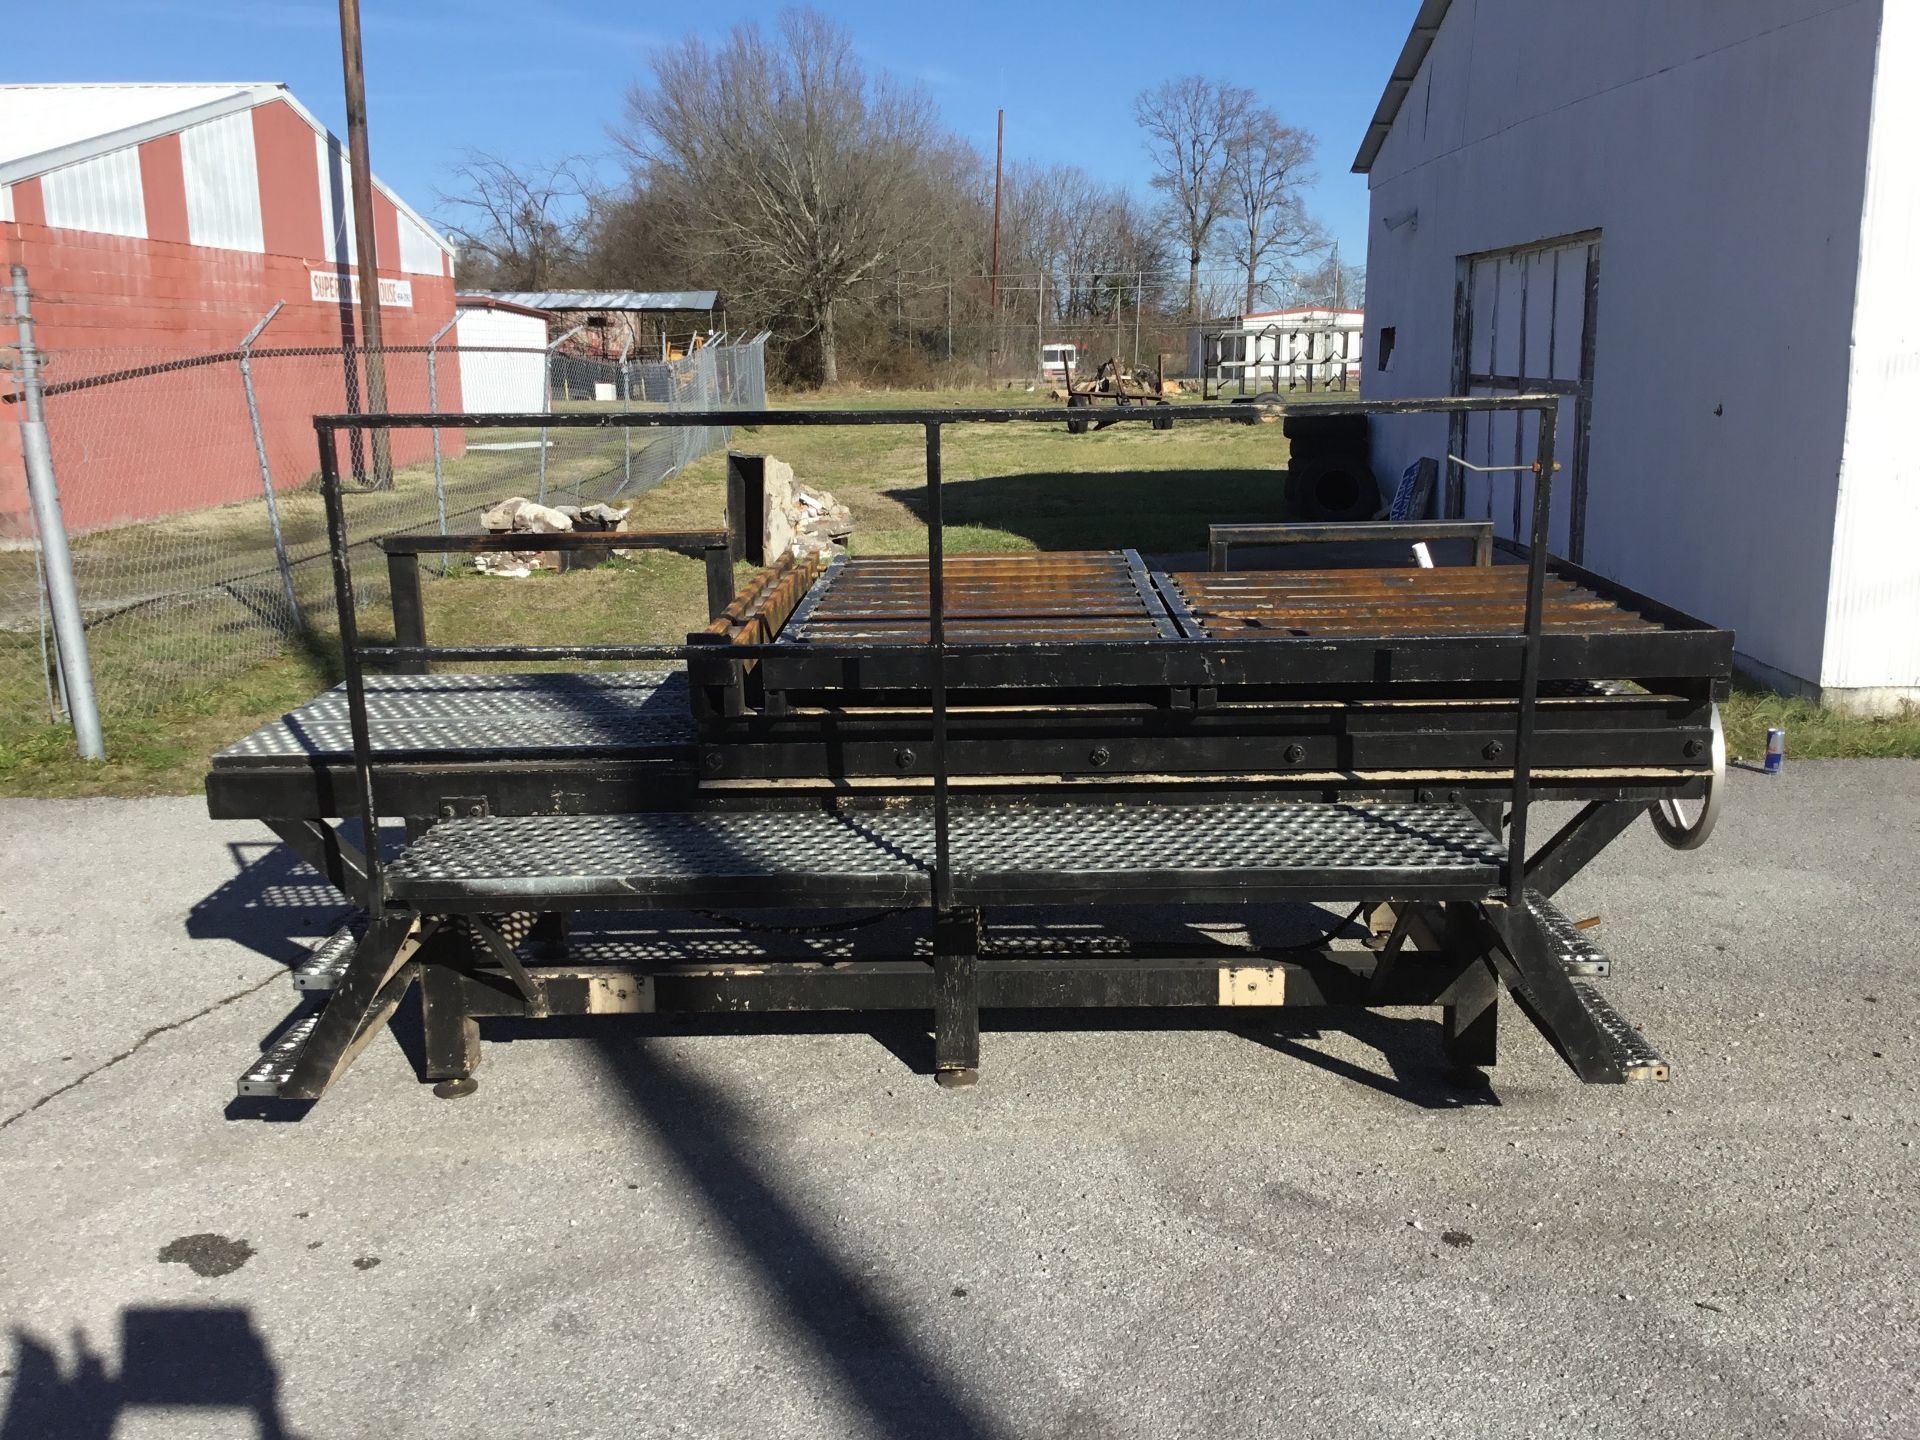 *LOCATED TULLAHOMA, TN* Adjustable Die-Changing Conveyor Table, Dimensions: 71" L x 106" W x 62" H